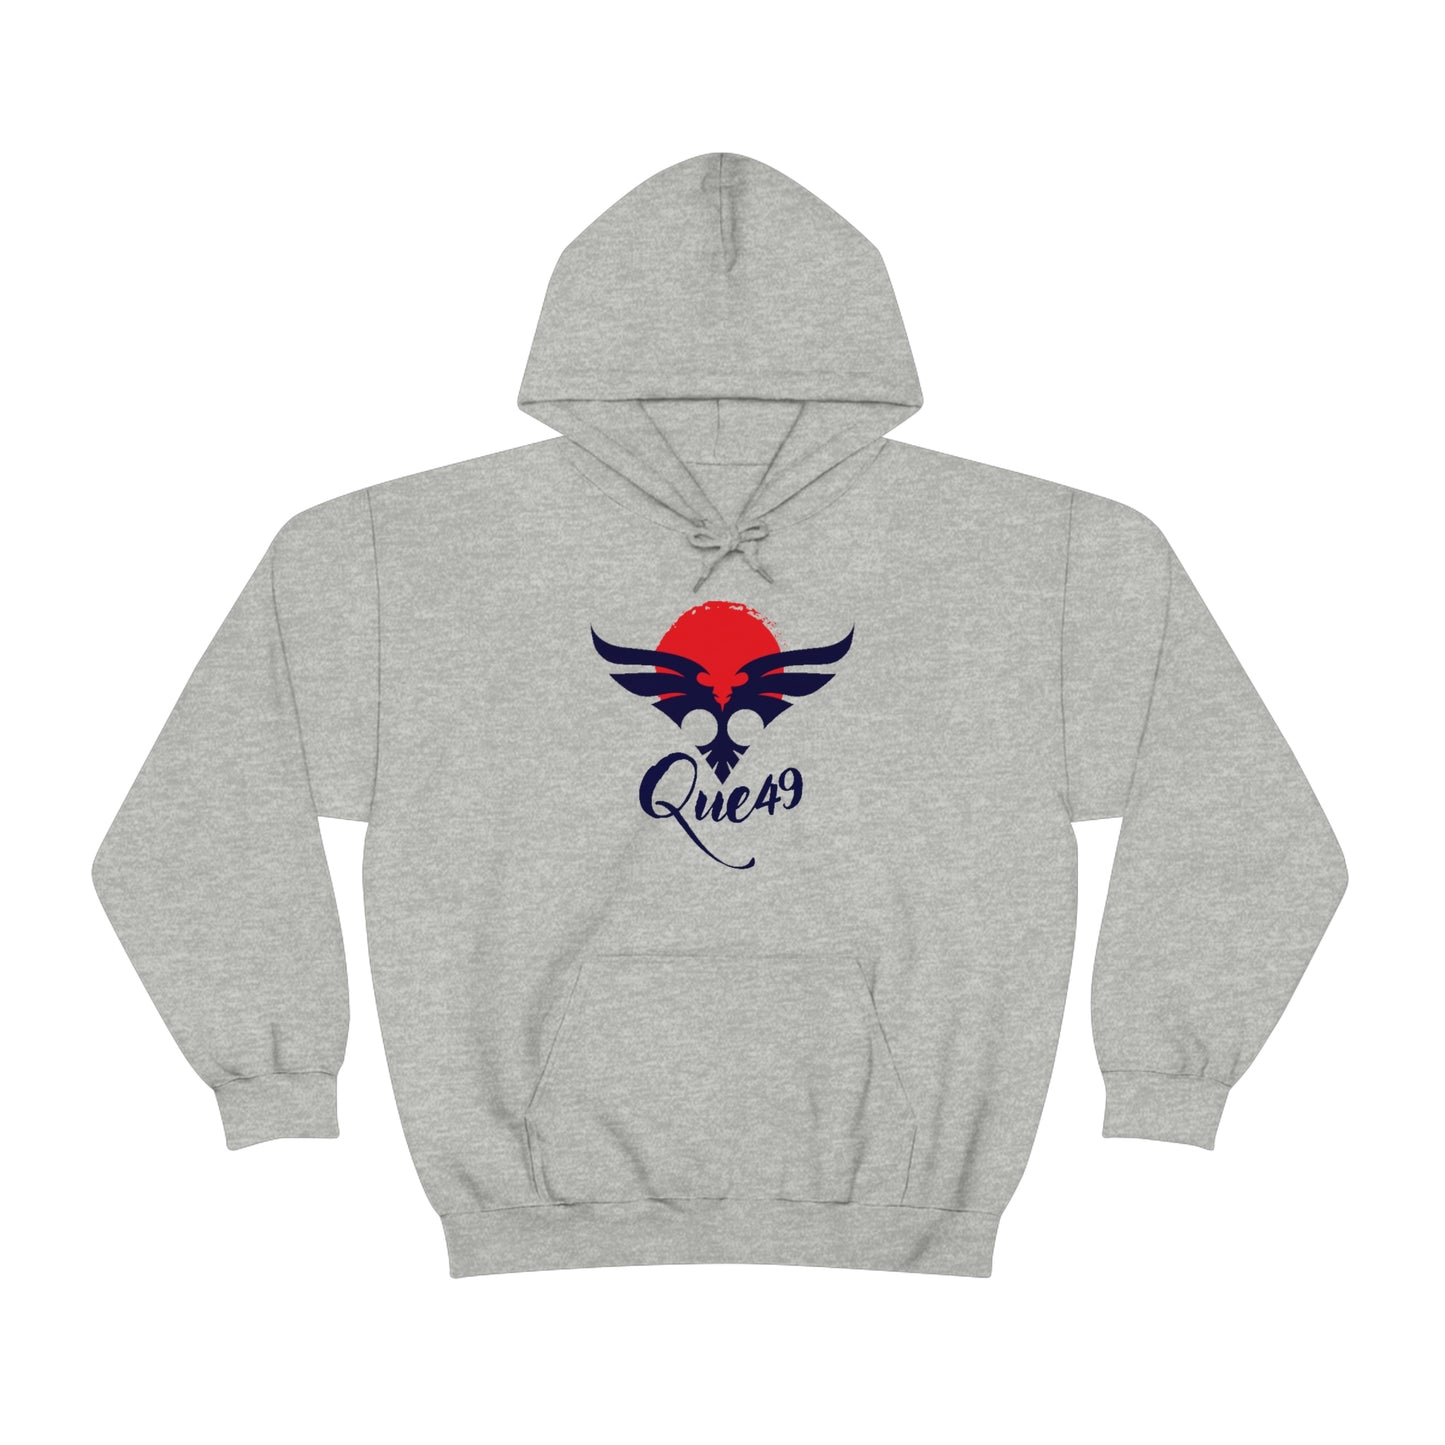 Embrace the finest things with the 'Que 49' Dynasty Unisex Heavy Blend™ Hooded Sweatshirt